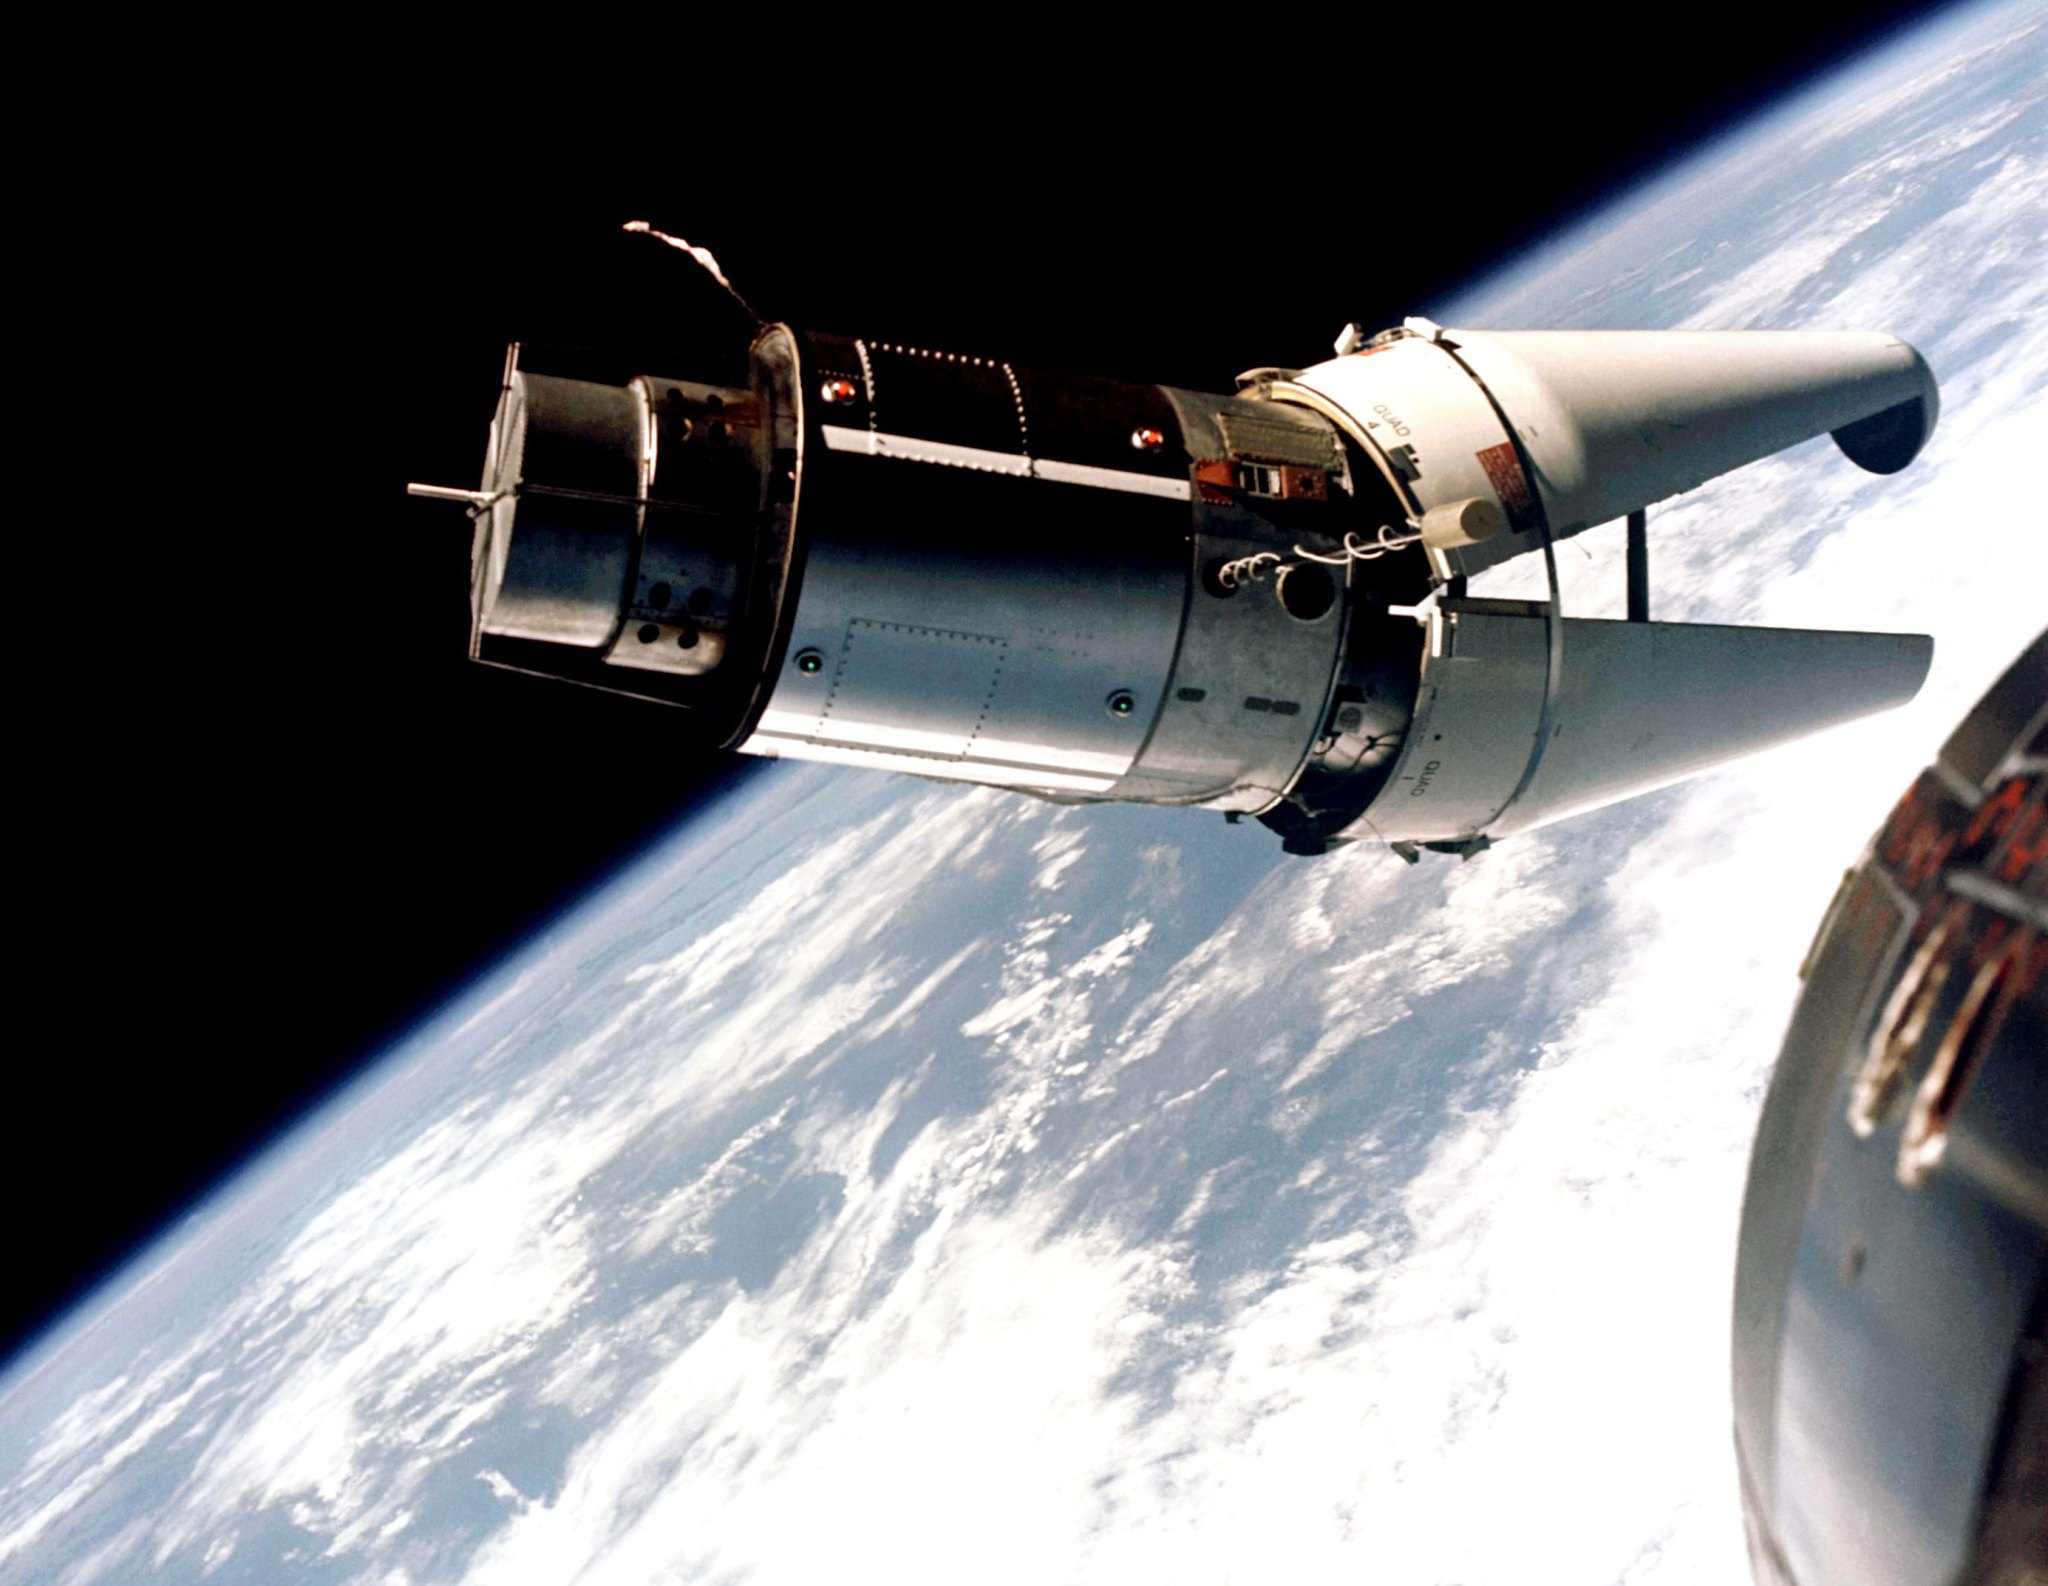 View of the Agena Target Vehicle from the Gemini IX spacecraft